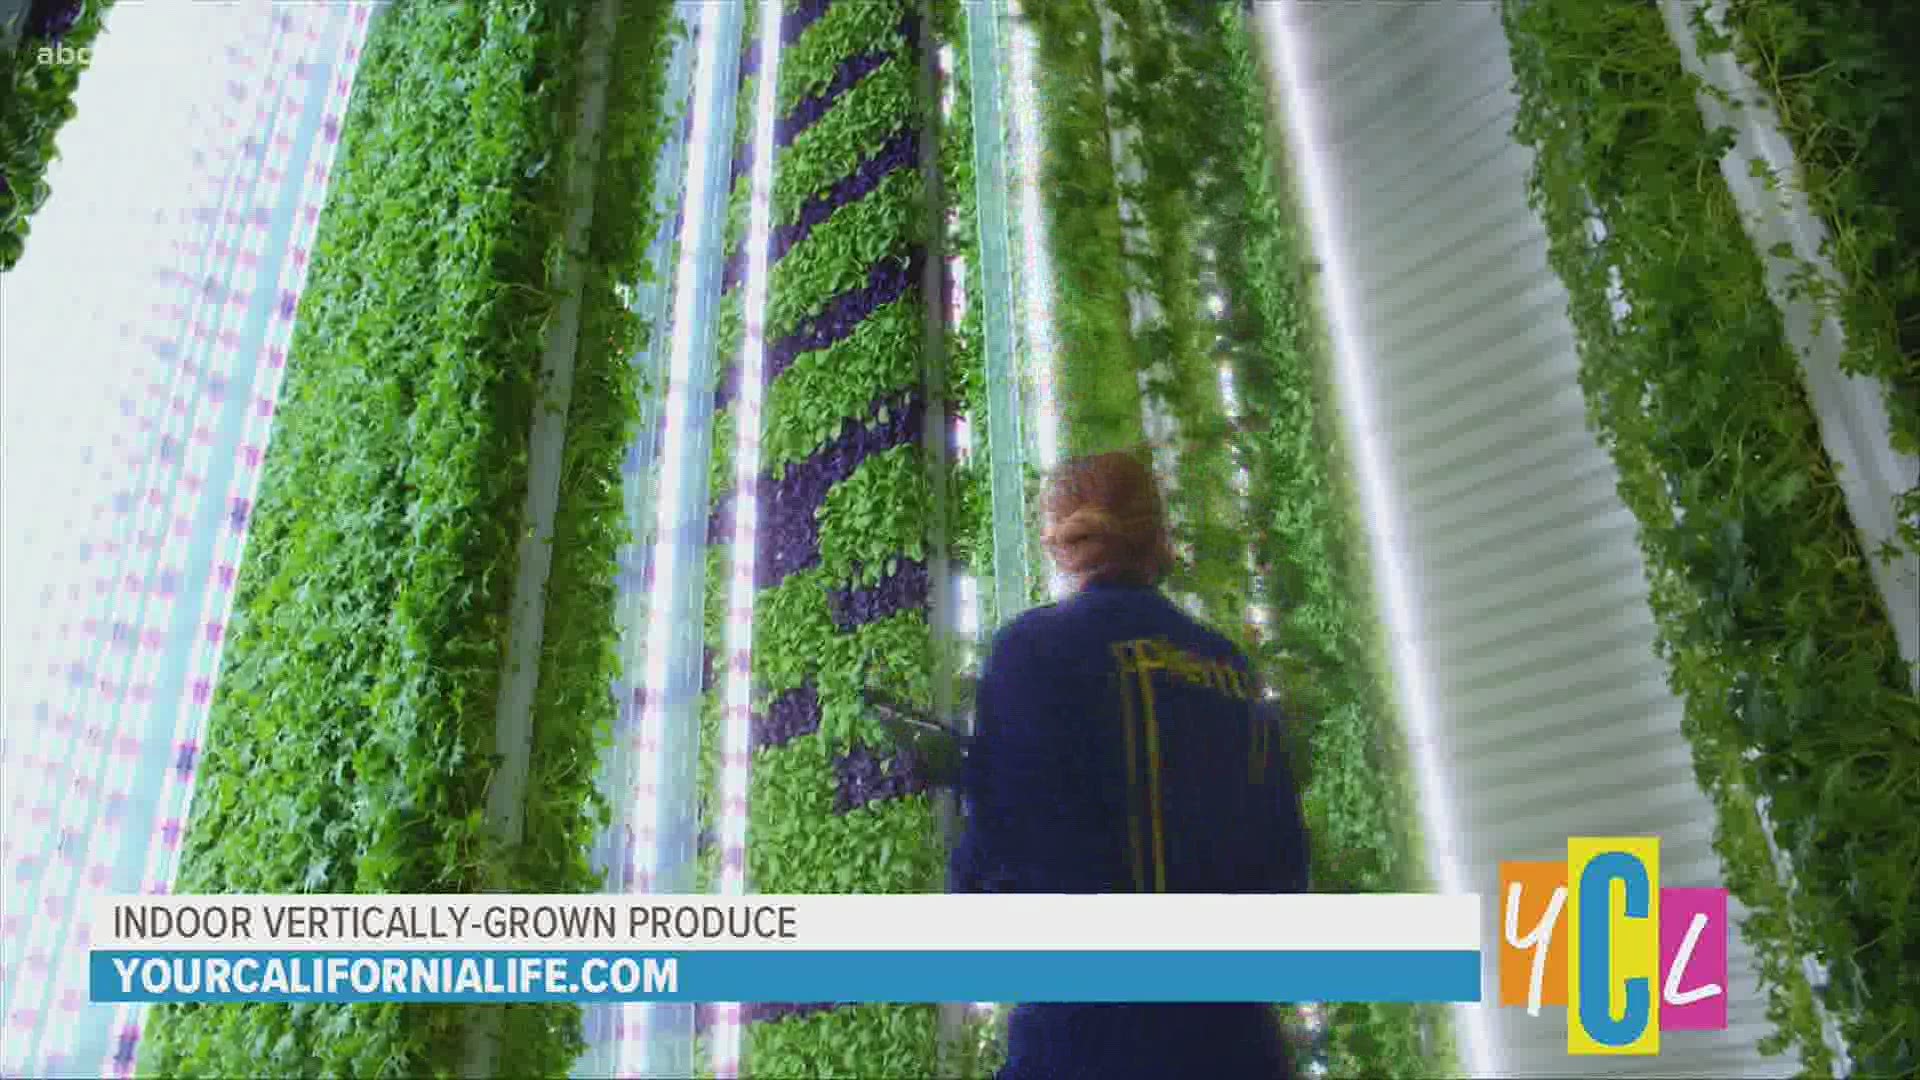 Indoor farming powered by robotics and technology is enabling one California company to grow 'Plenty' of flavorful nutrient-rich and pesticide-free produce.